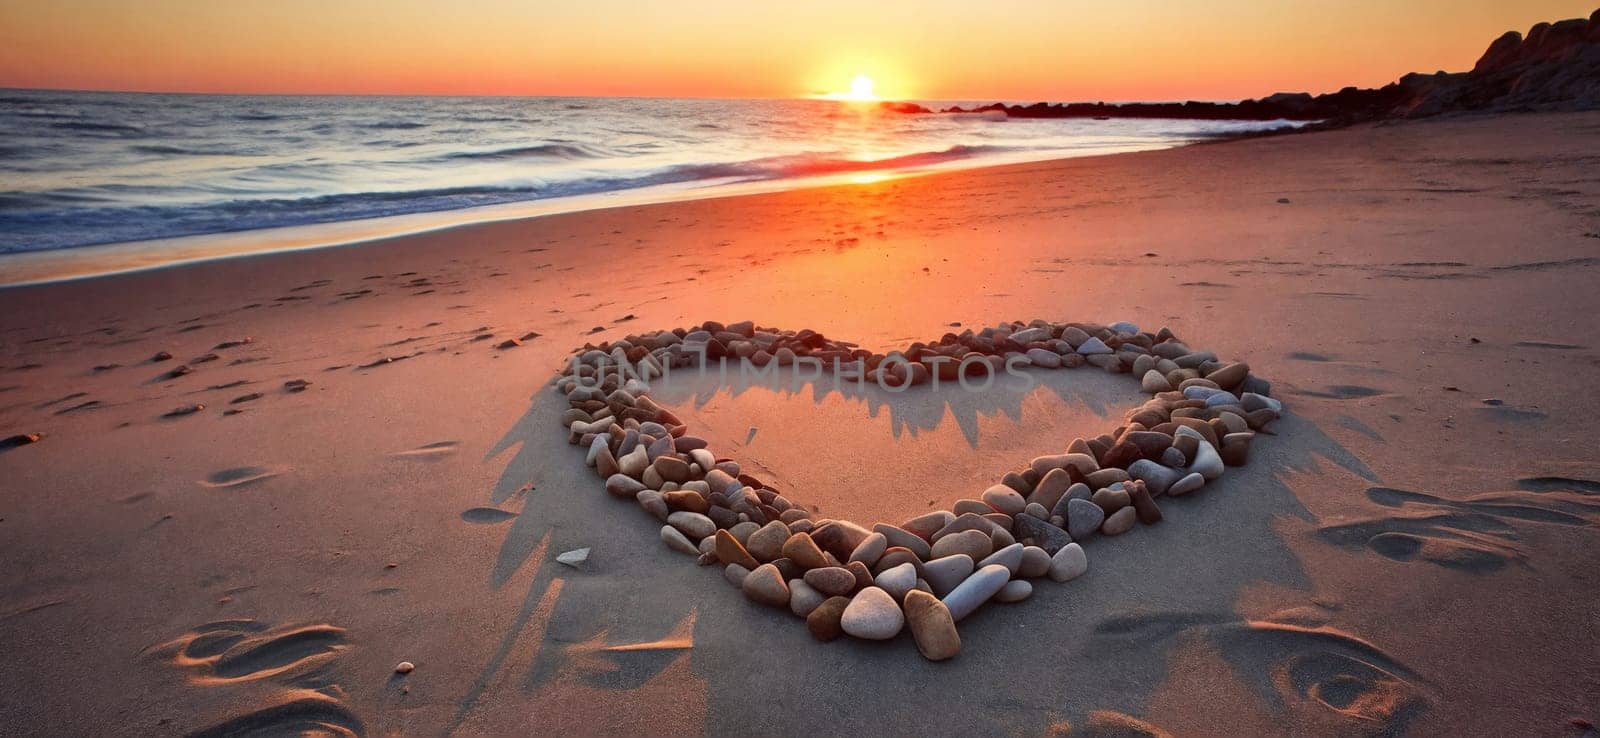 Heart-shaped stones on a sandy beach, illuminated by the warm colors of a sunset by GoodOlga